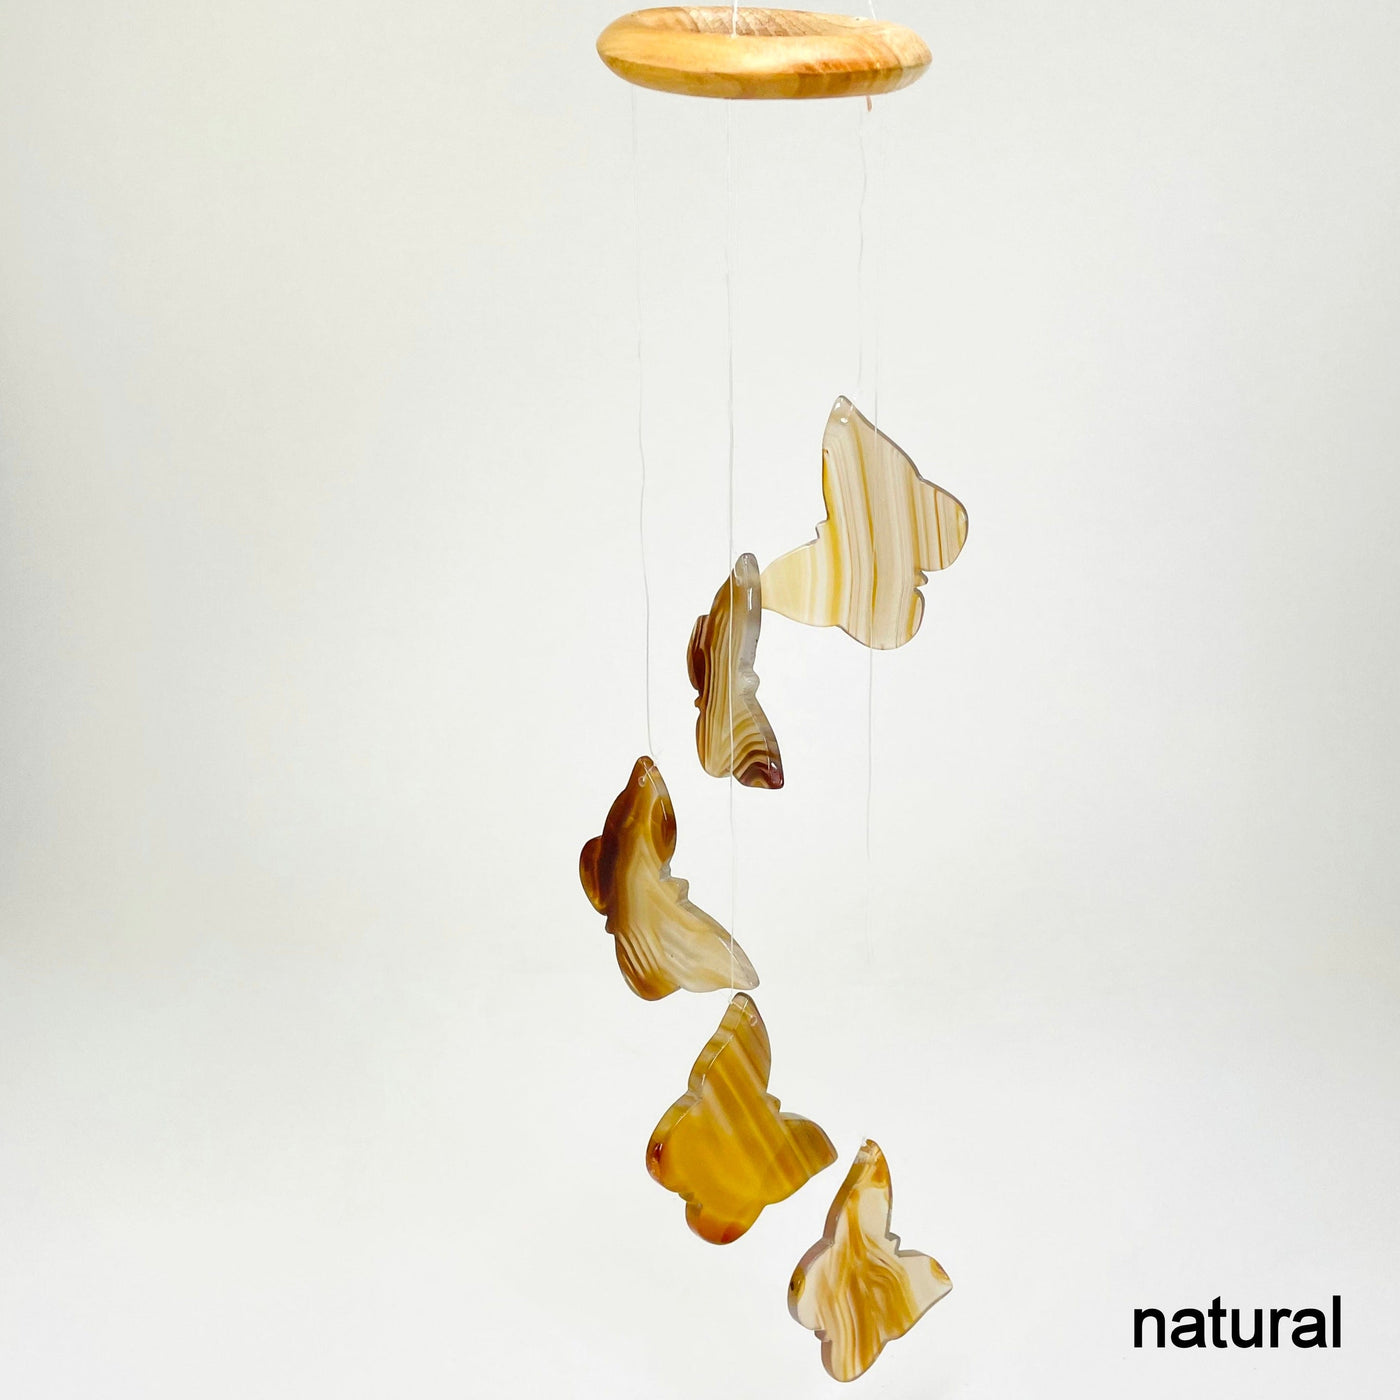 one natural agate butterfly wind chime hanging in front of white background